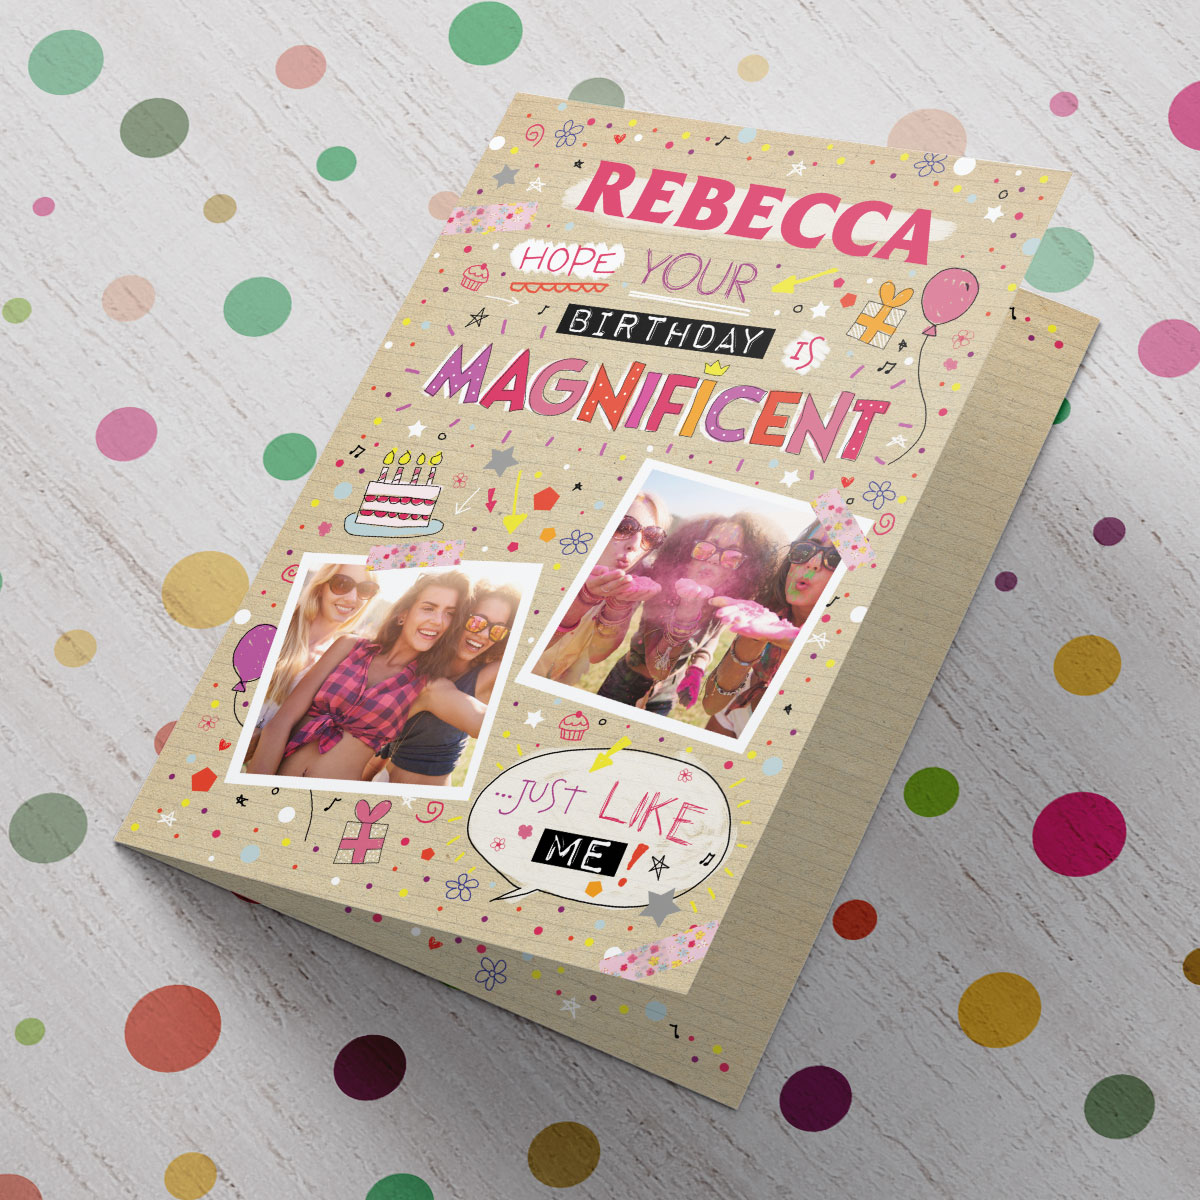 Personalised Photo Upload Birthday Card - Magnificent Like Me